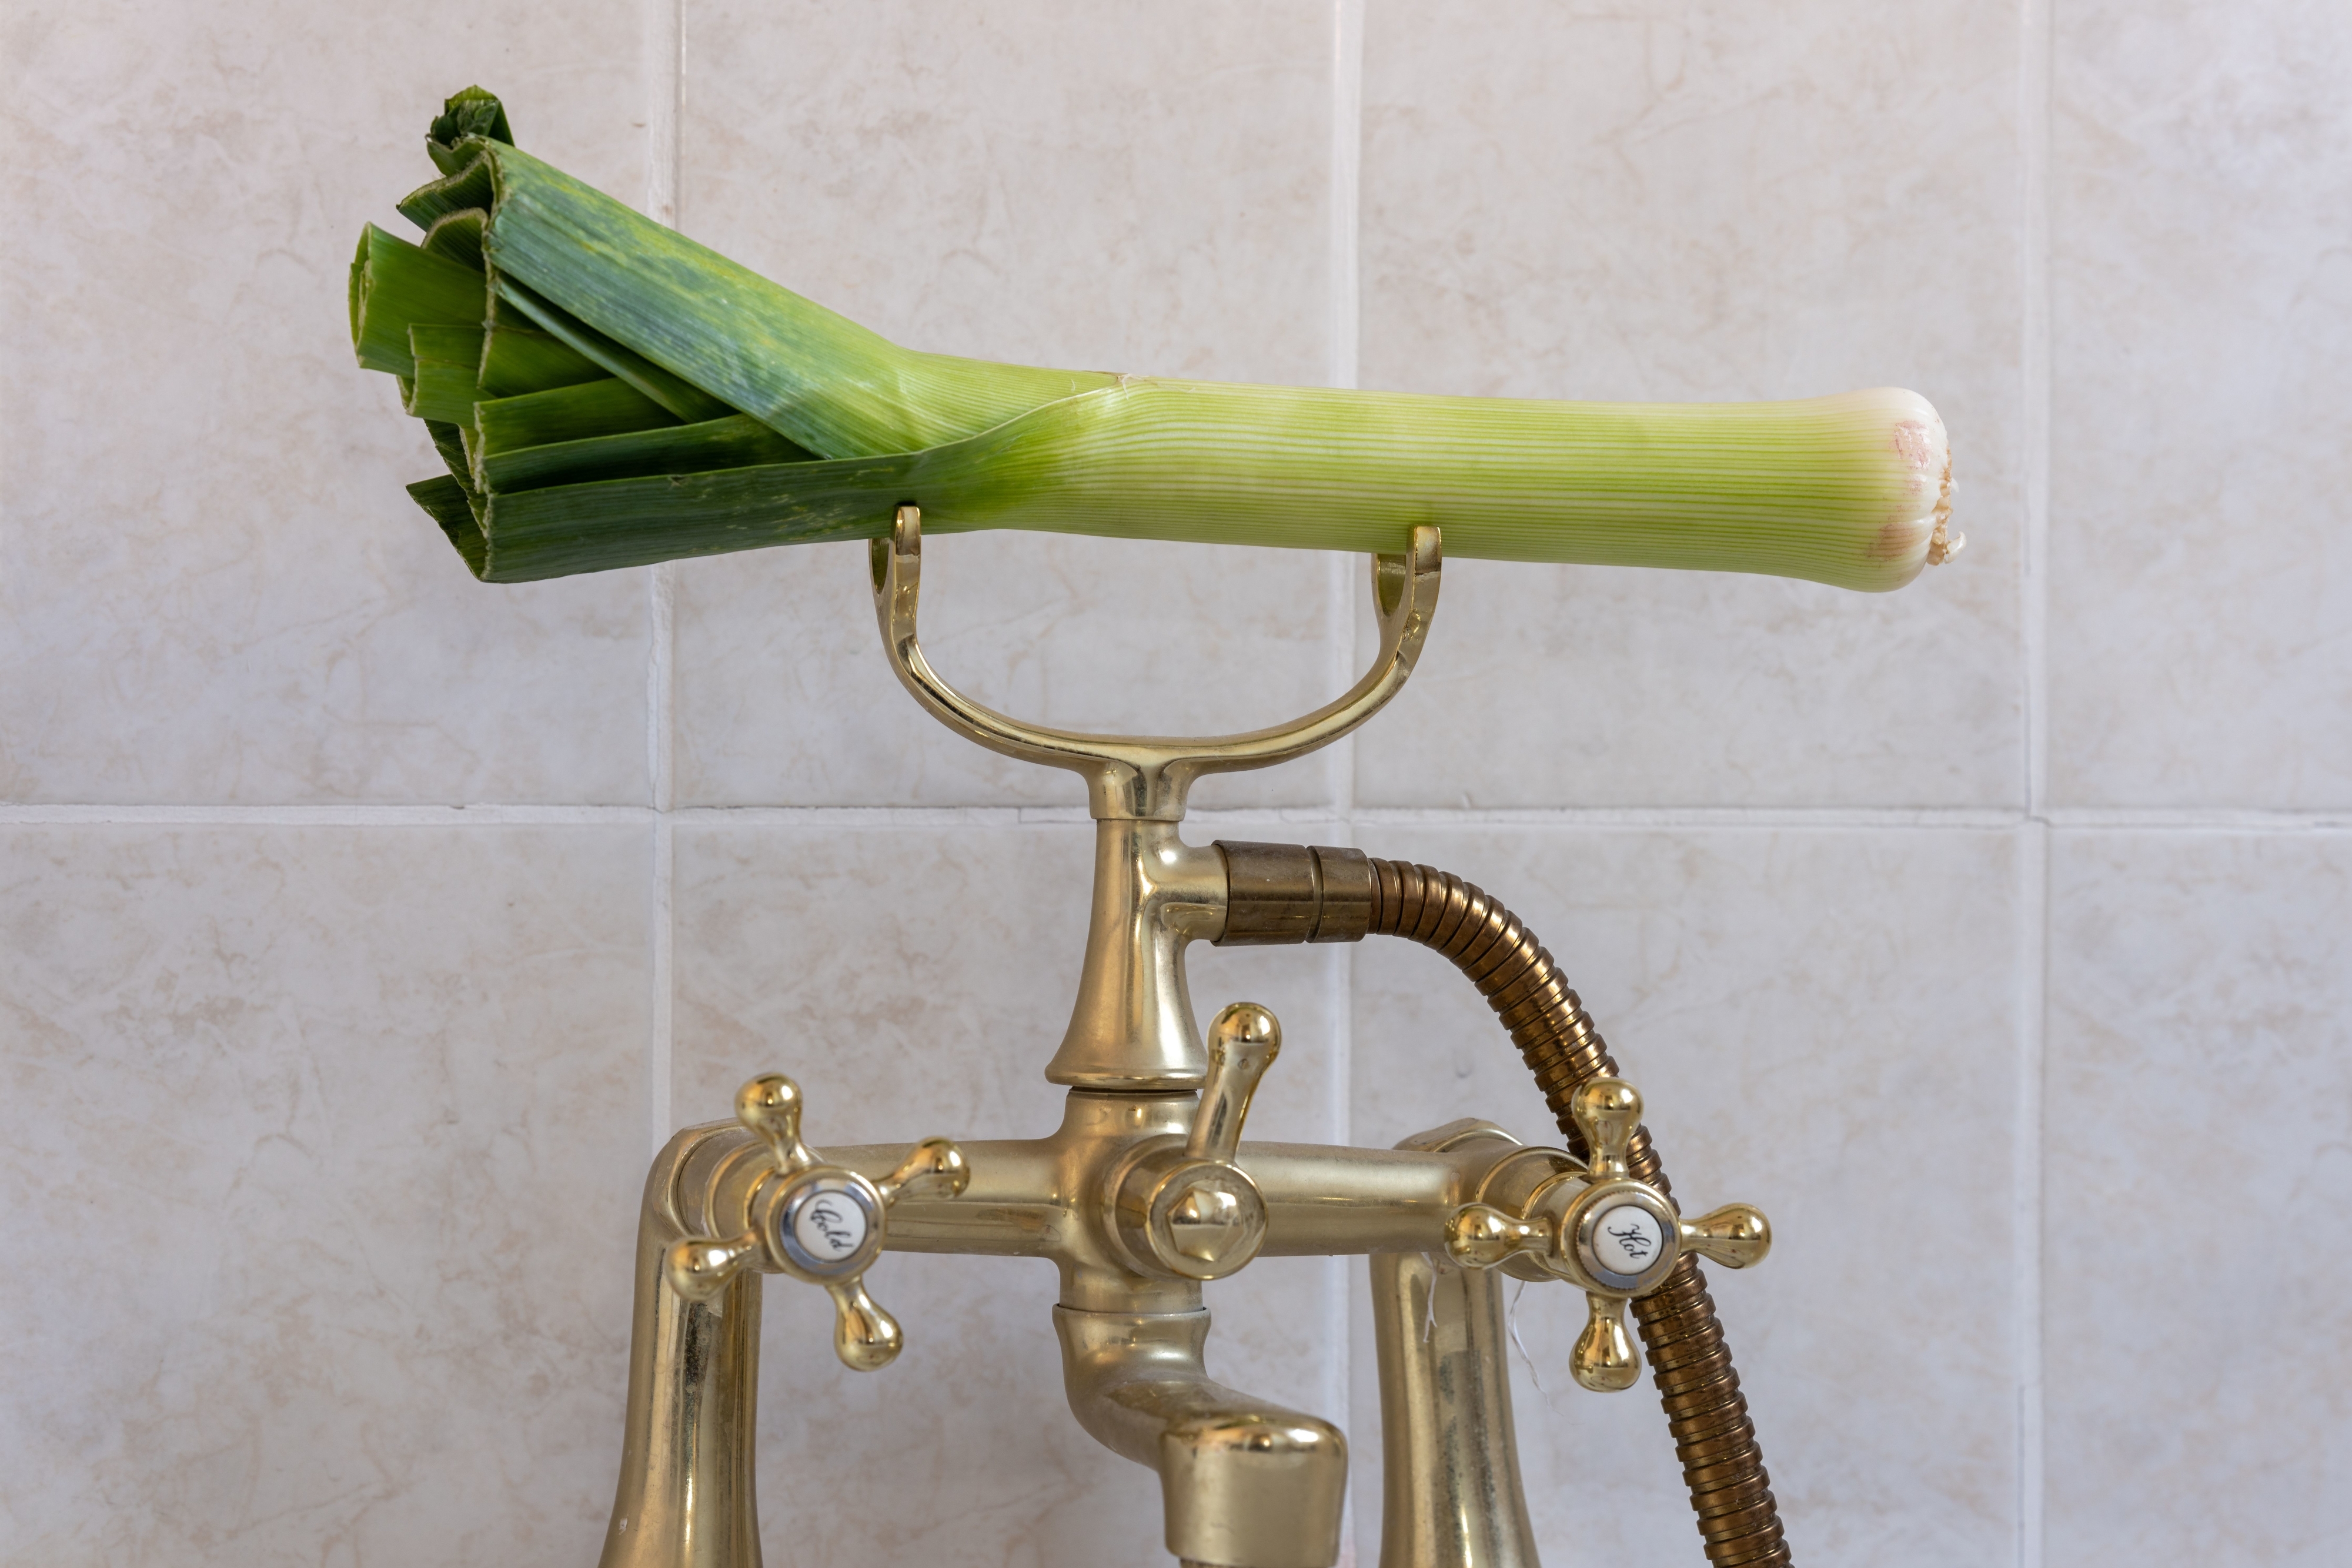 Leek positioned on a gold-tone bathroom faucet, against a tiled wall